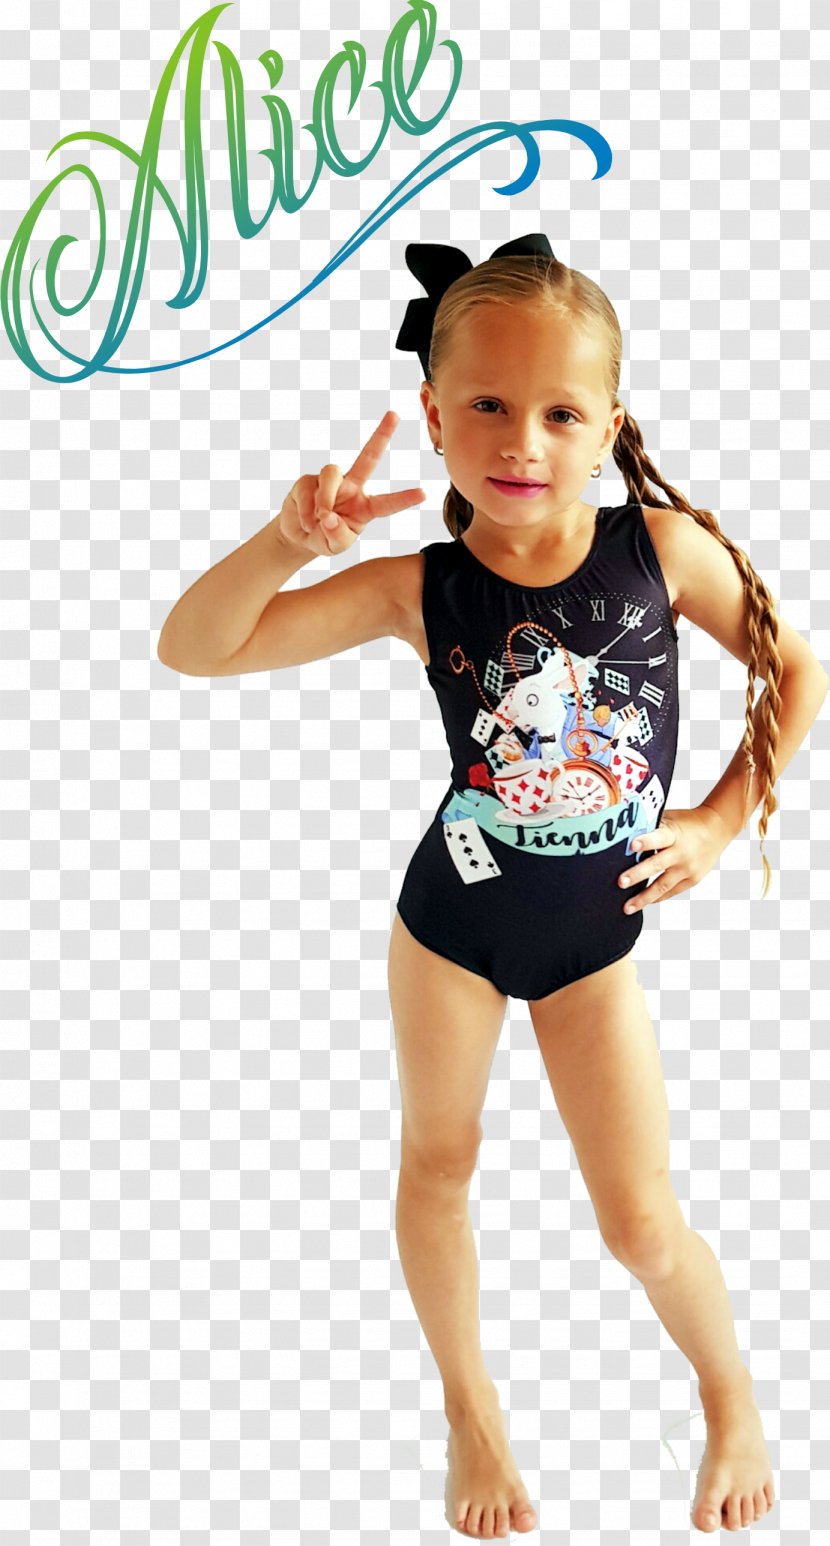 Bodysuits & Unitards Vengo A Aclarar Cheerleading Uniforms Swimsuit Toddler - Silhouette - International Age Rating Coalition Transparent PNG